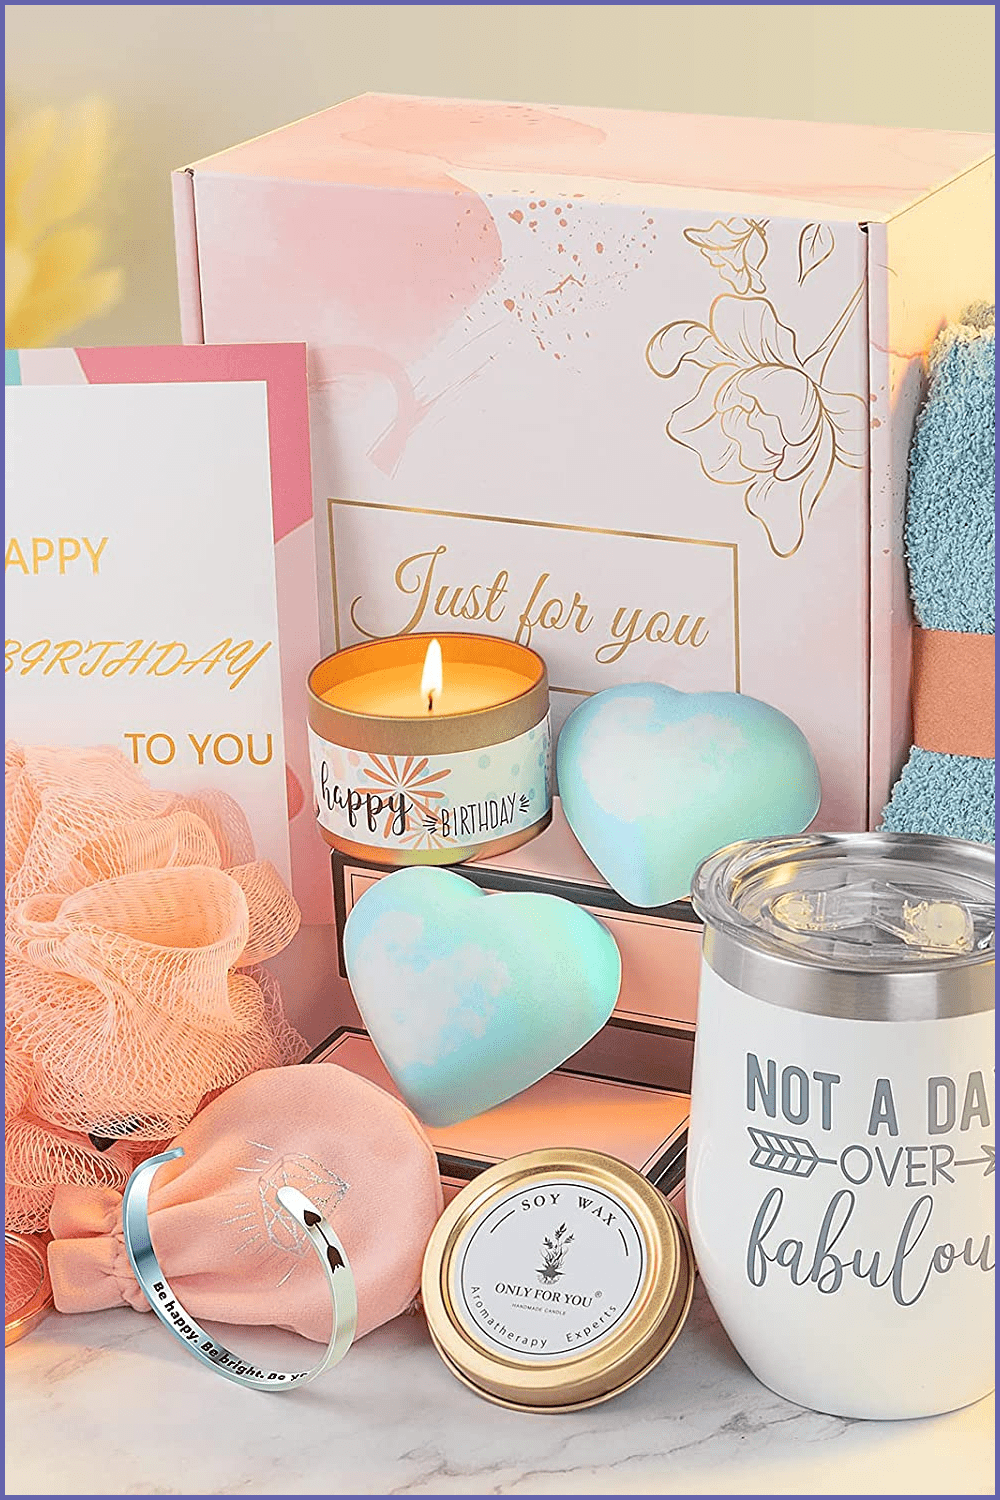 Photo of candles and bath cosmetics.